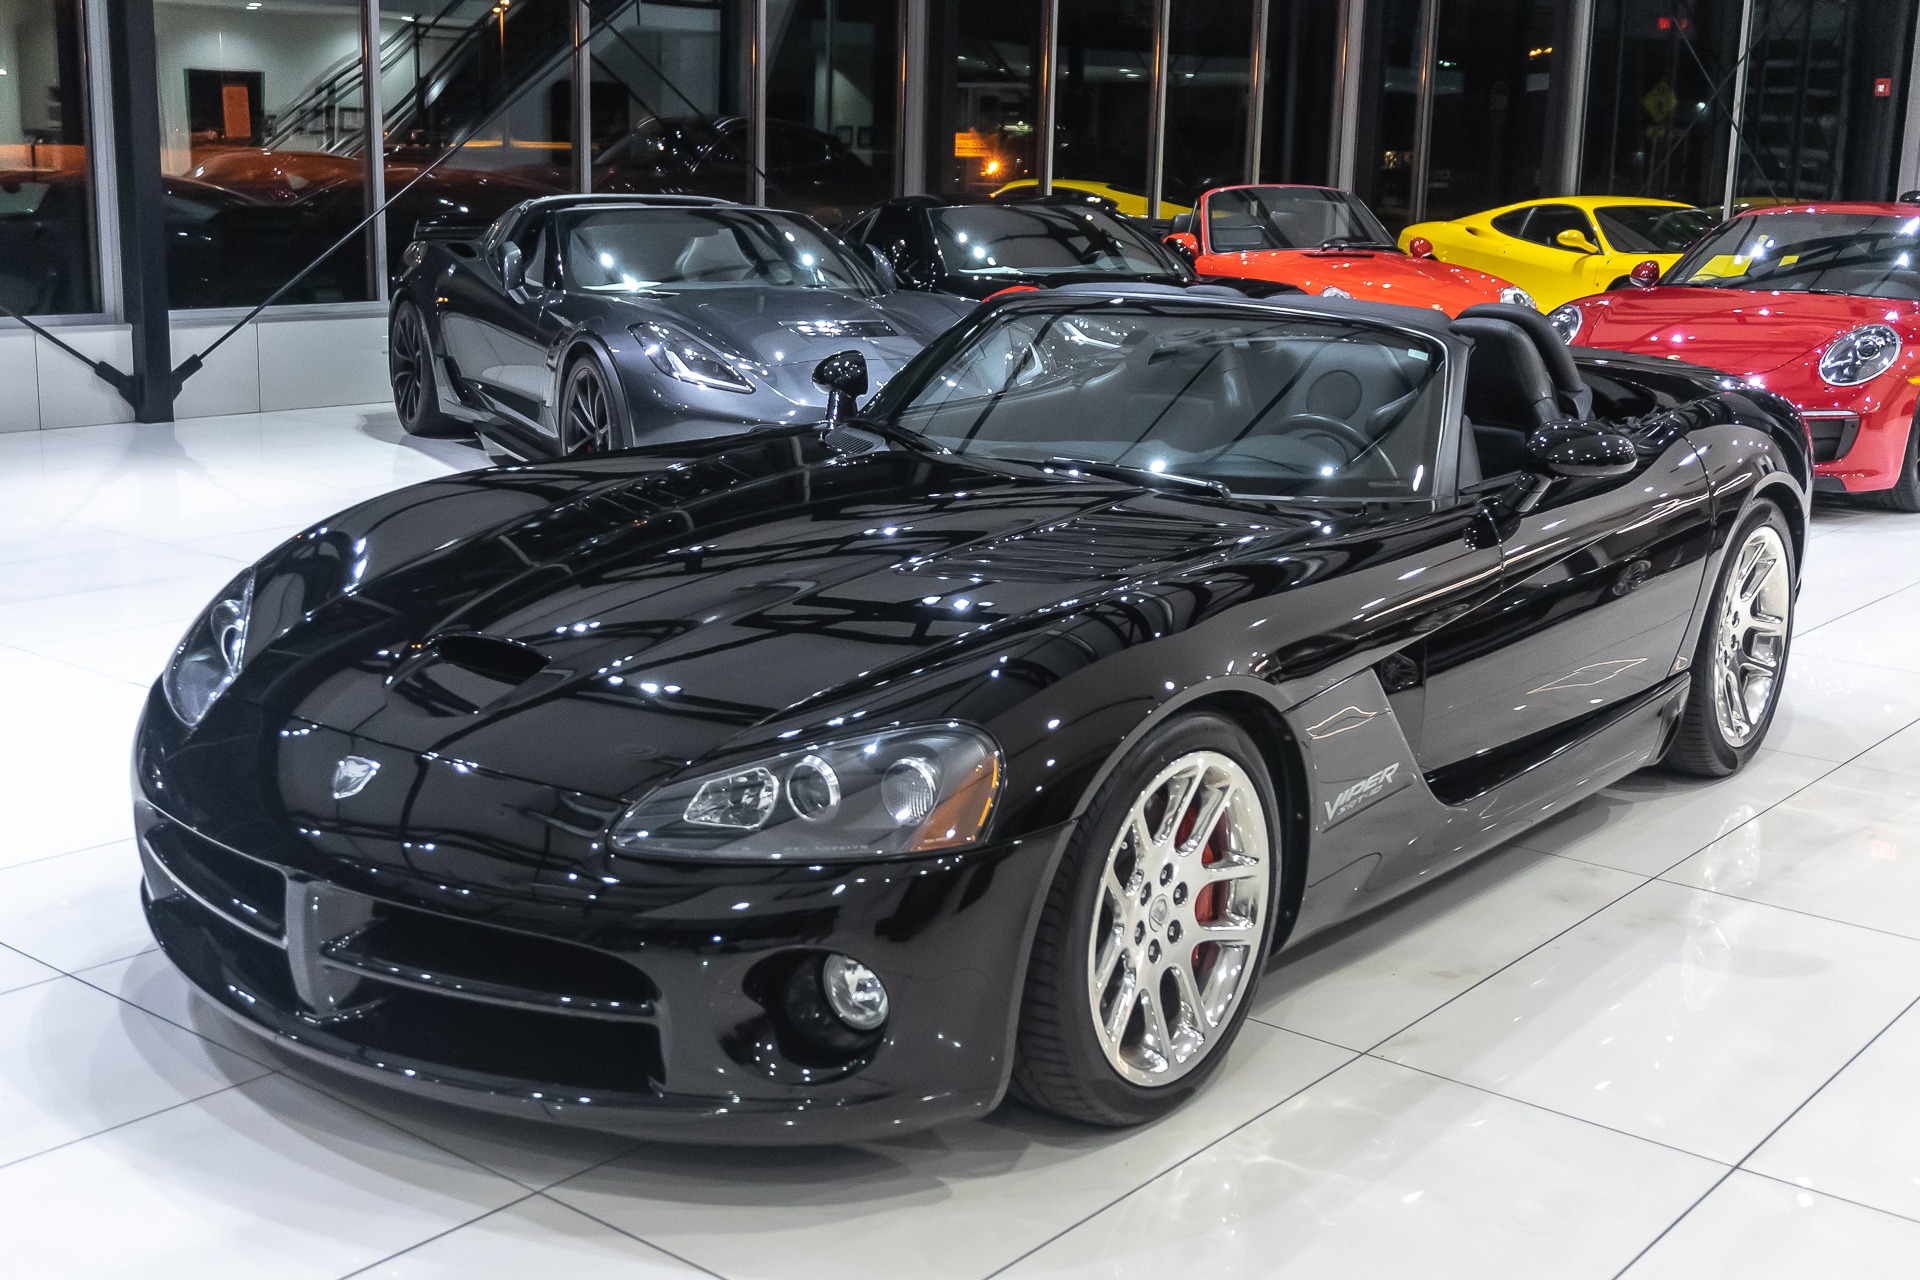 Used-2004-Dodge-Viper-SRT-10-Convertible-Upgraded-625WHP-